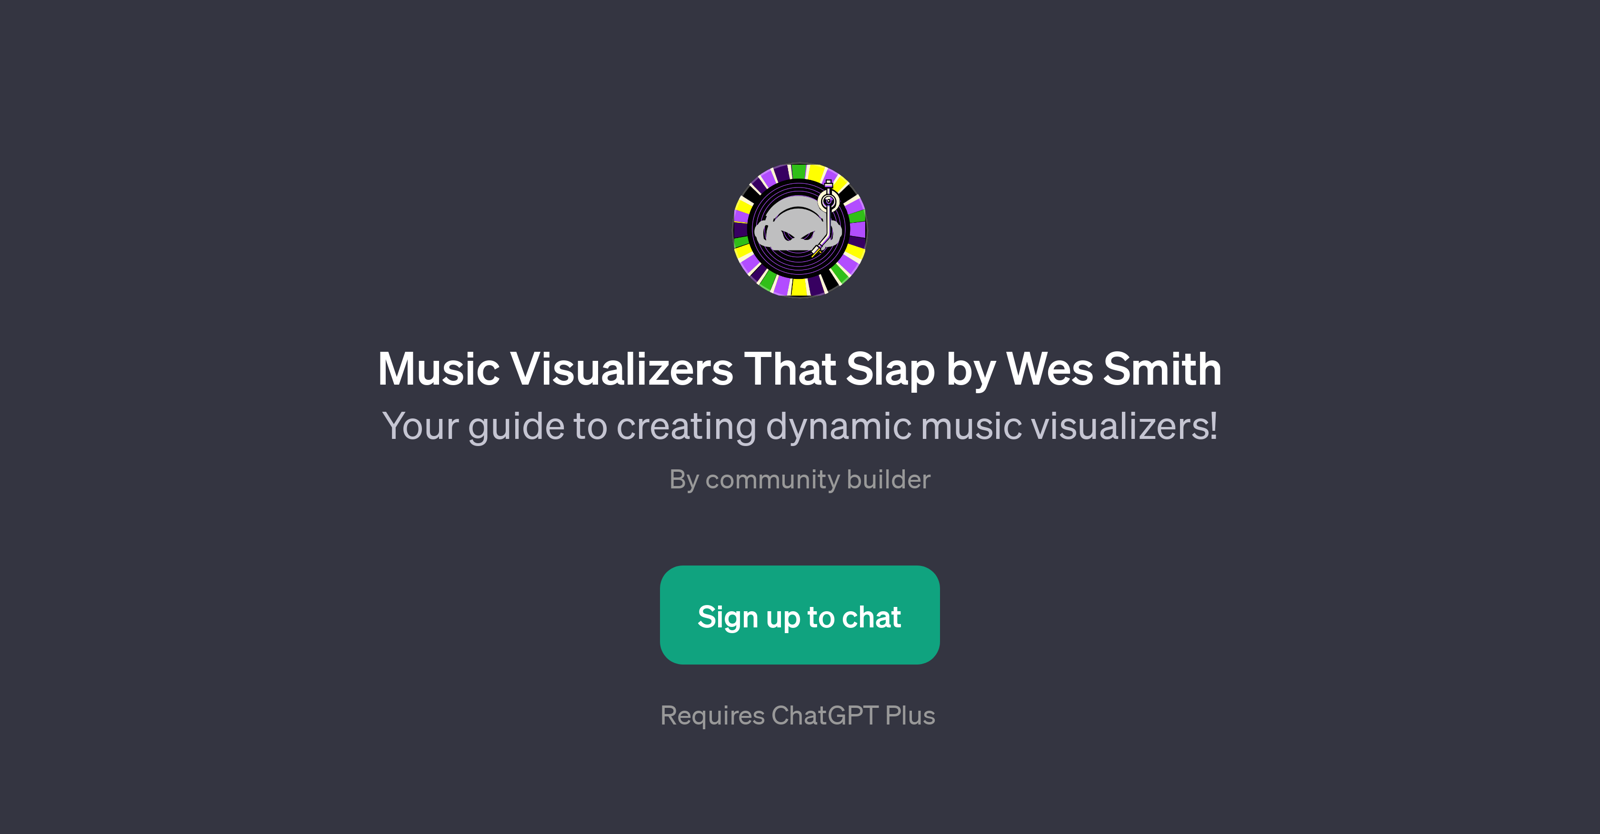 Music Visualizers That Slap by Wes Smith website